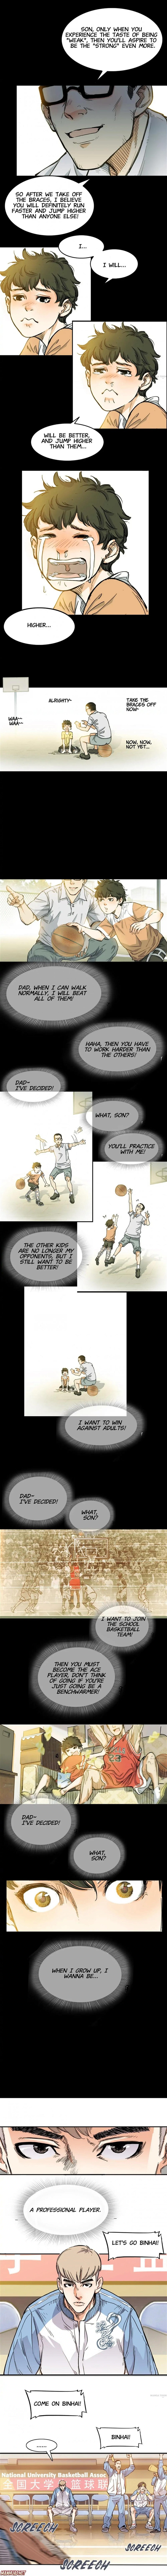 Streetball in the Hood Chapter 3 - Page 1